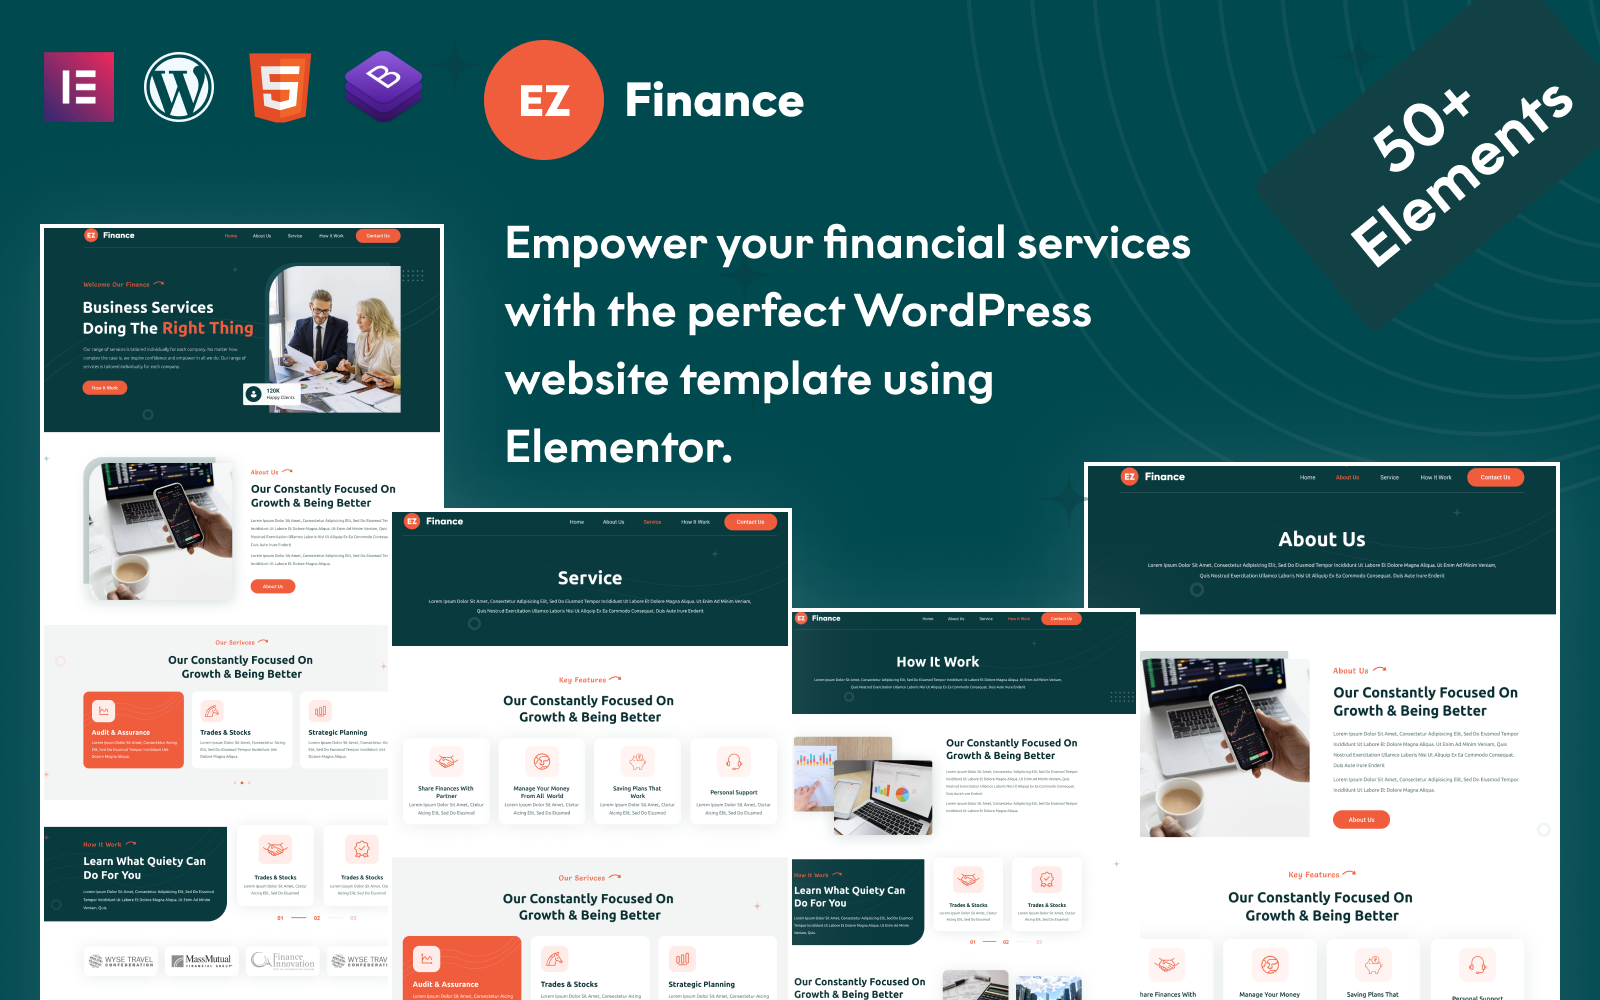 EZFinance: Empower your financial services with WordPress responsive template using Elementor.